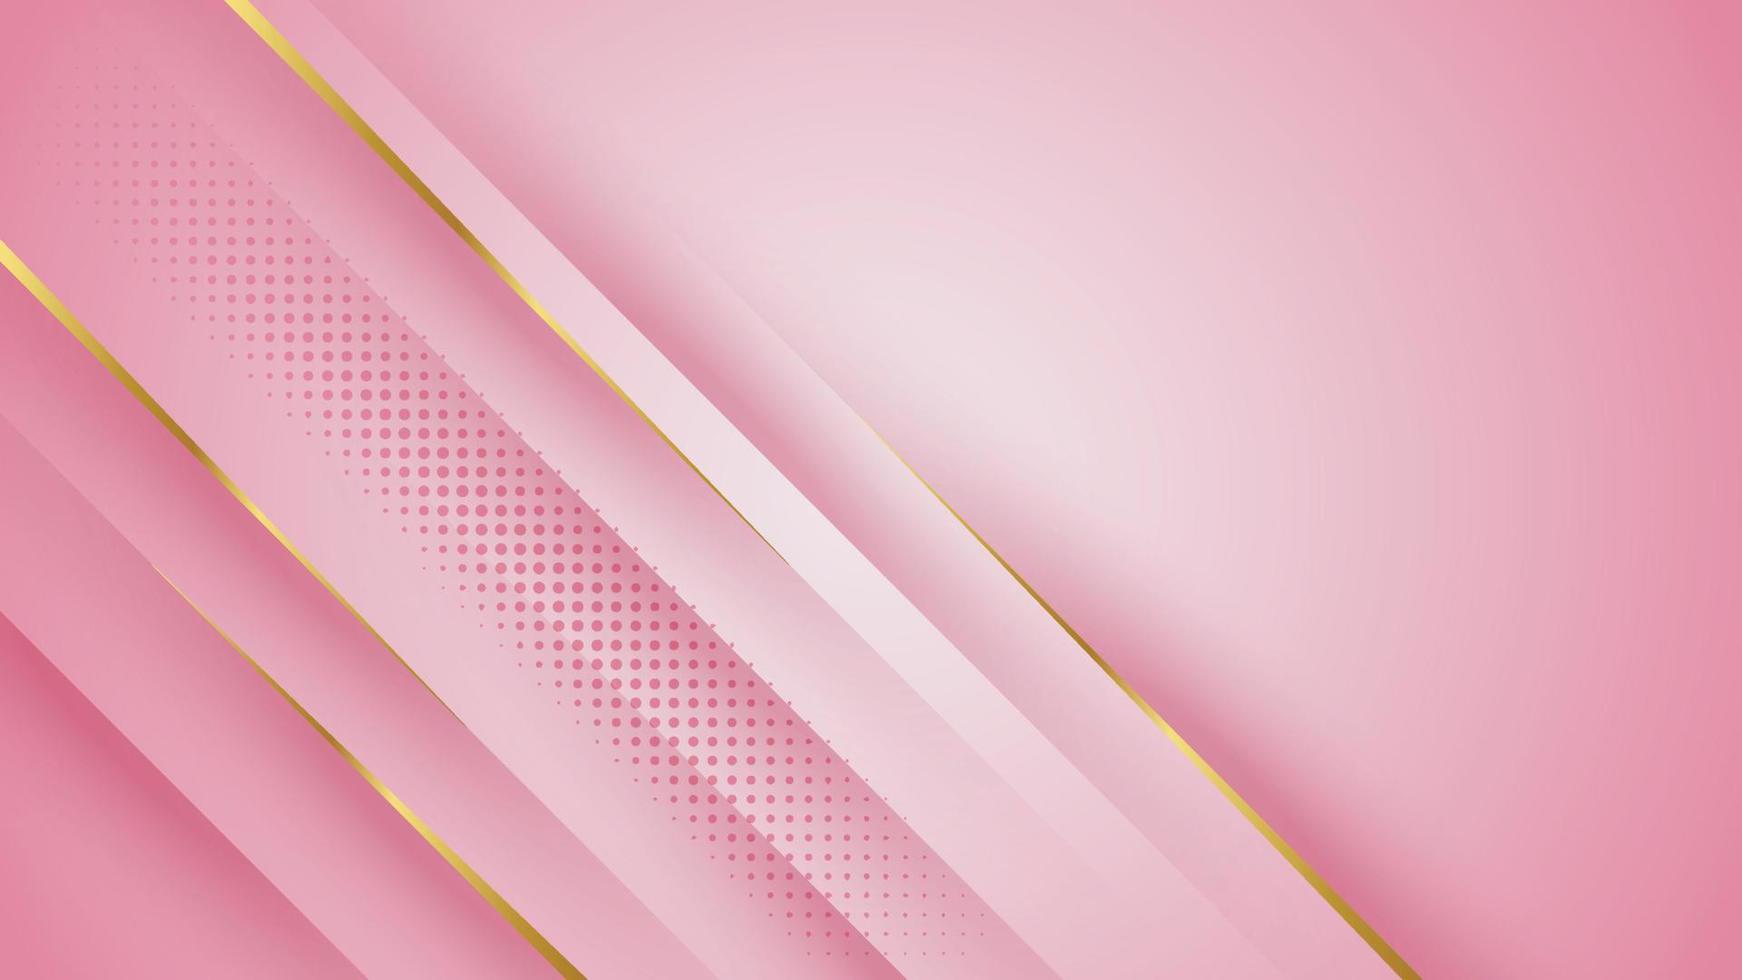 Luxury light pink abstract background combine with golden lines element, Illustration from vector about modern template deluxe design.